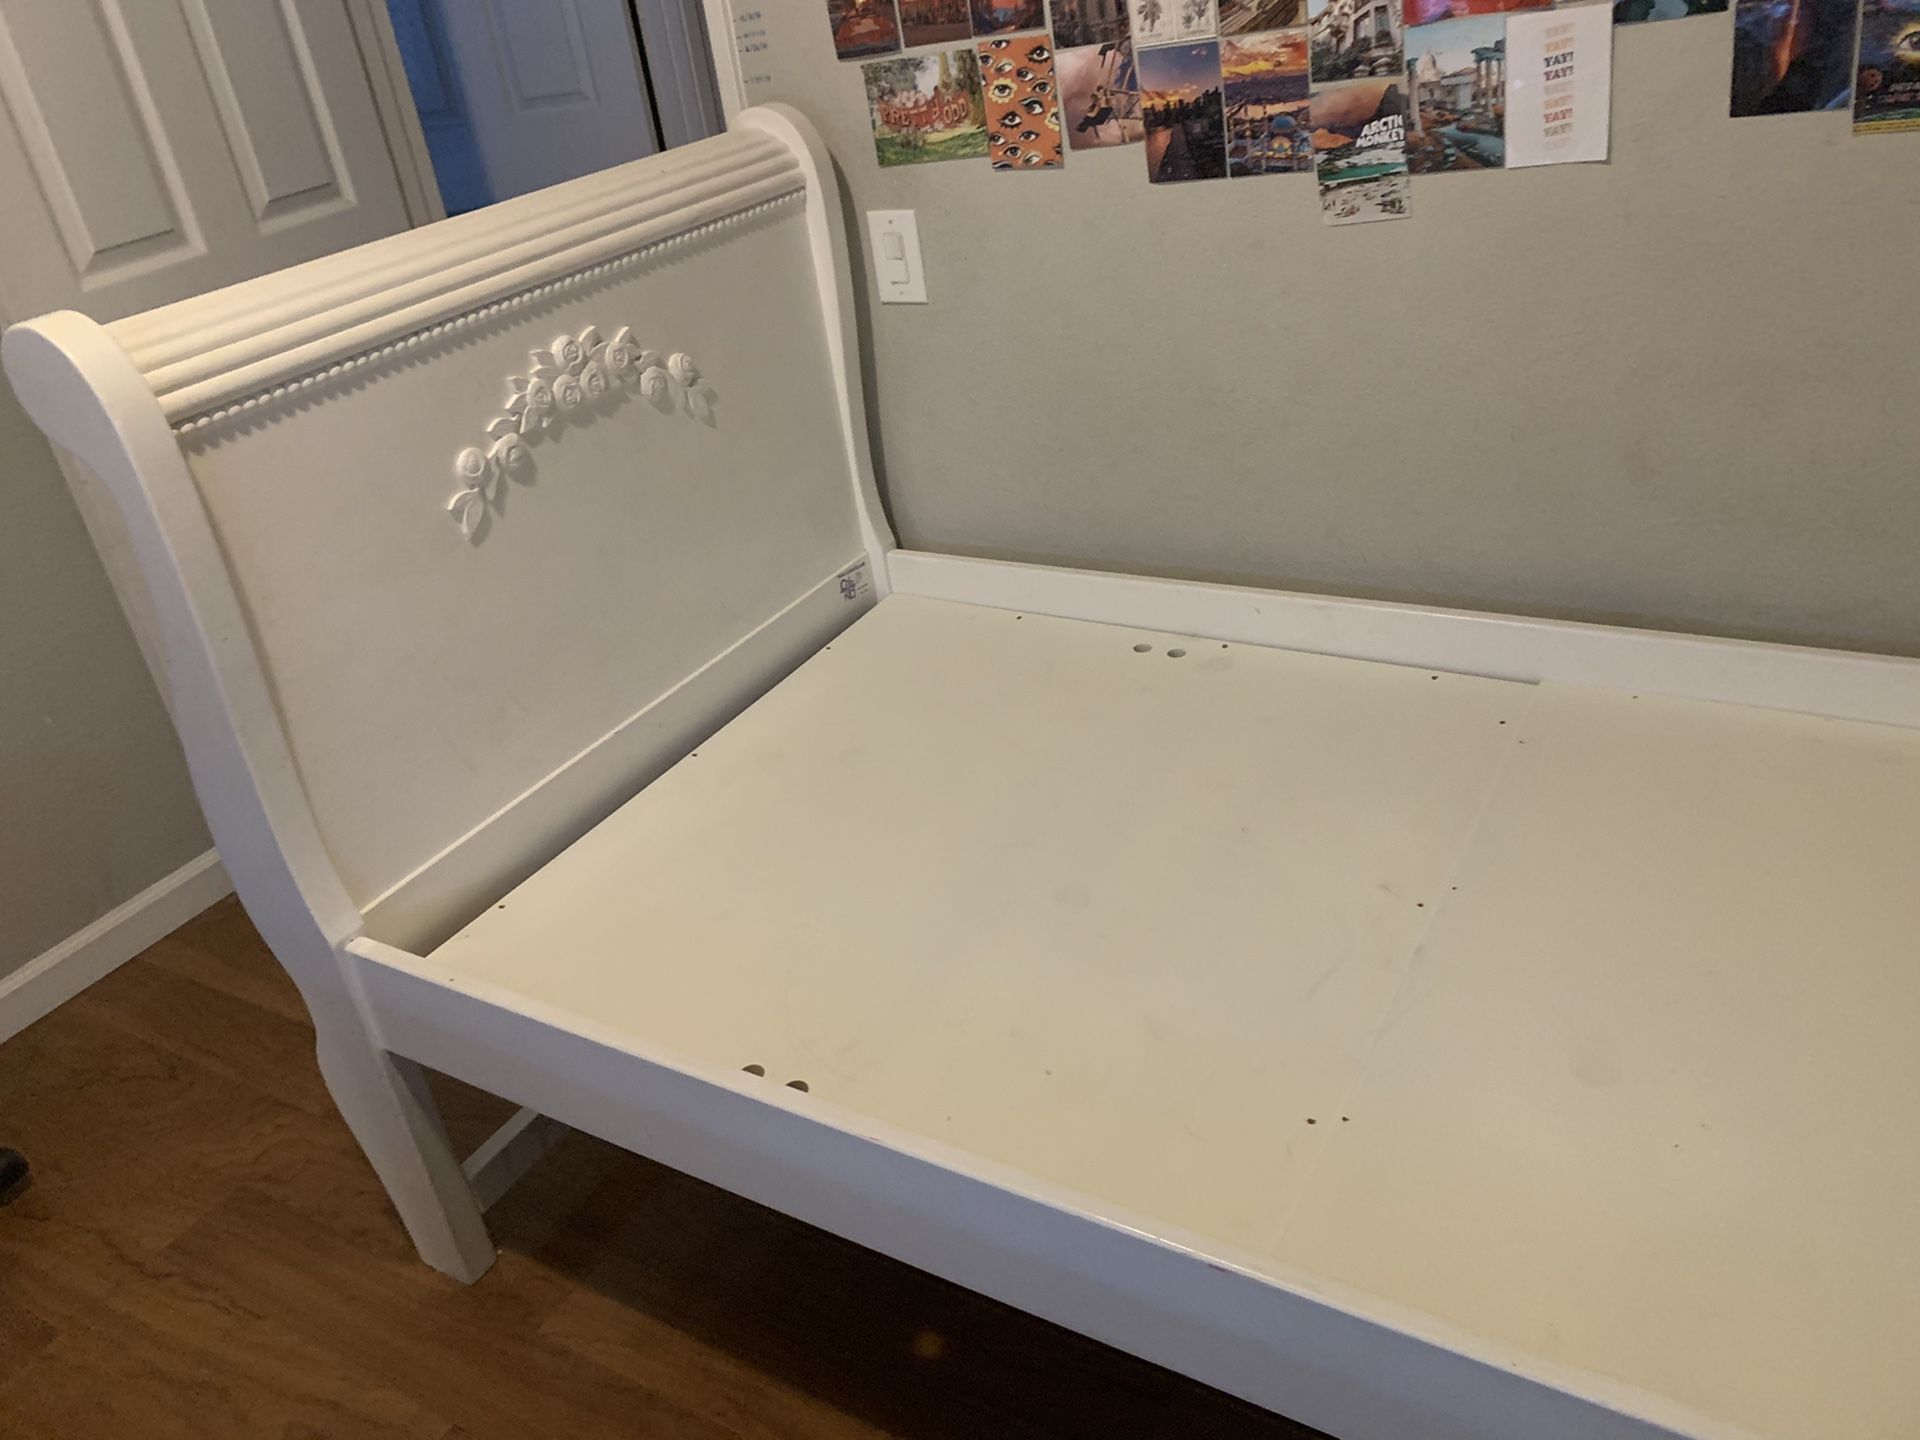 Free Twin bed frame